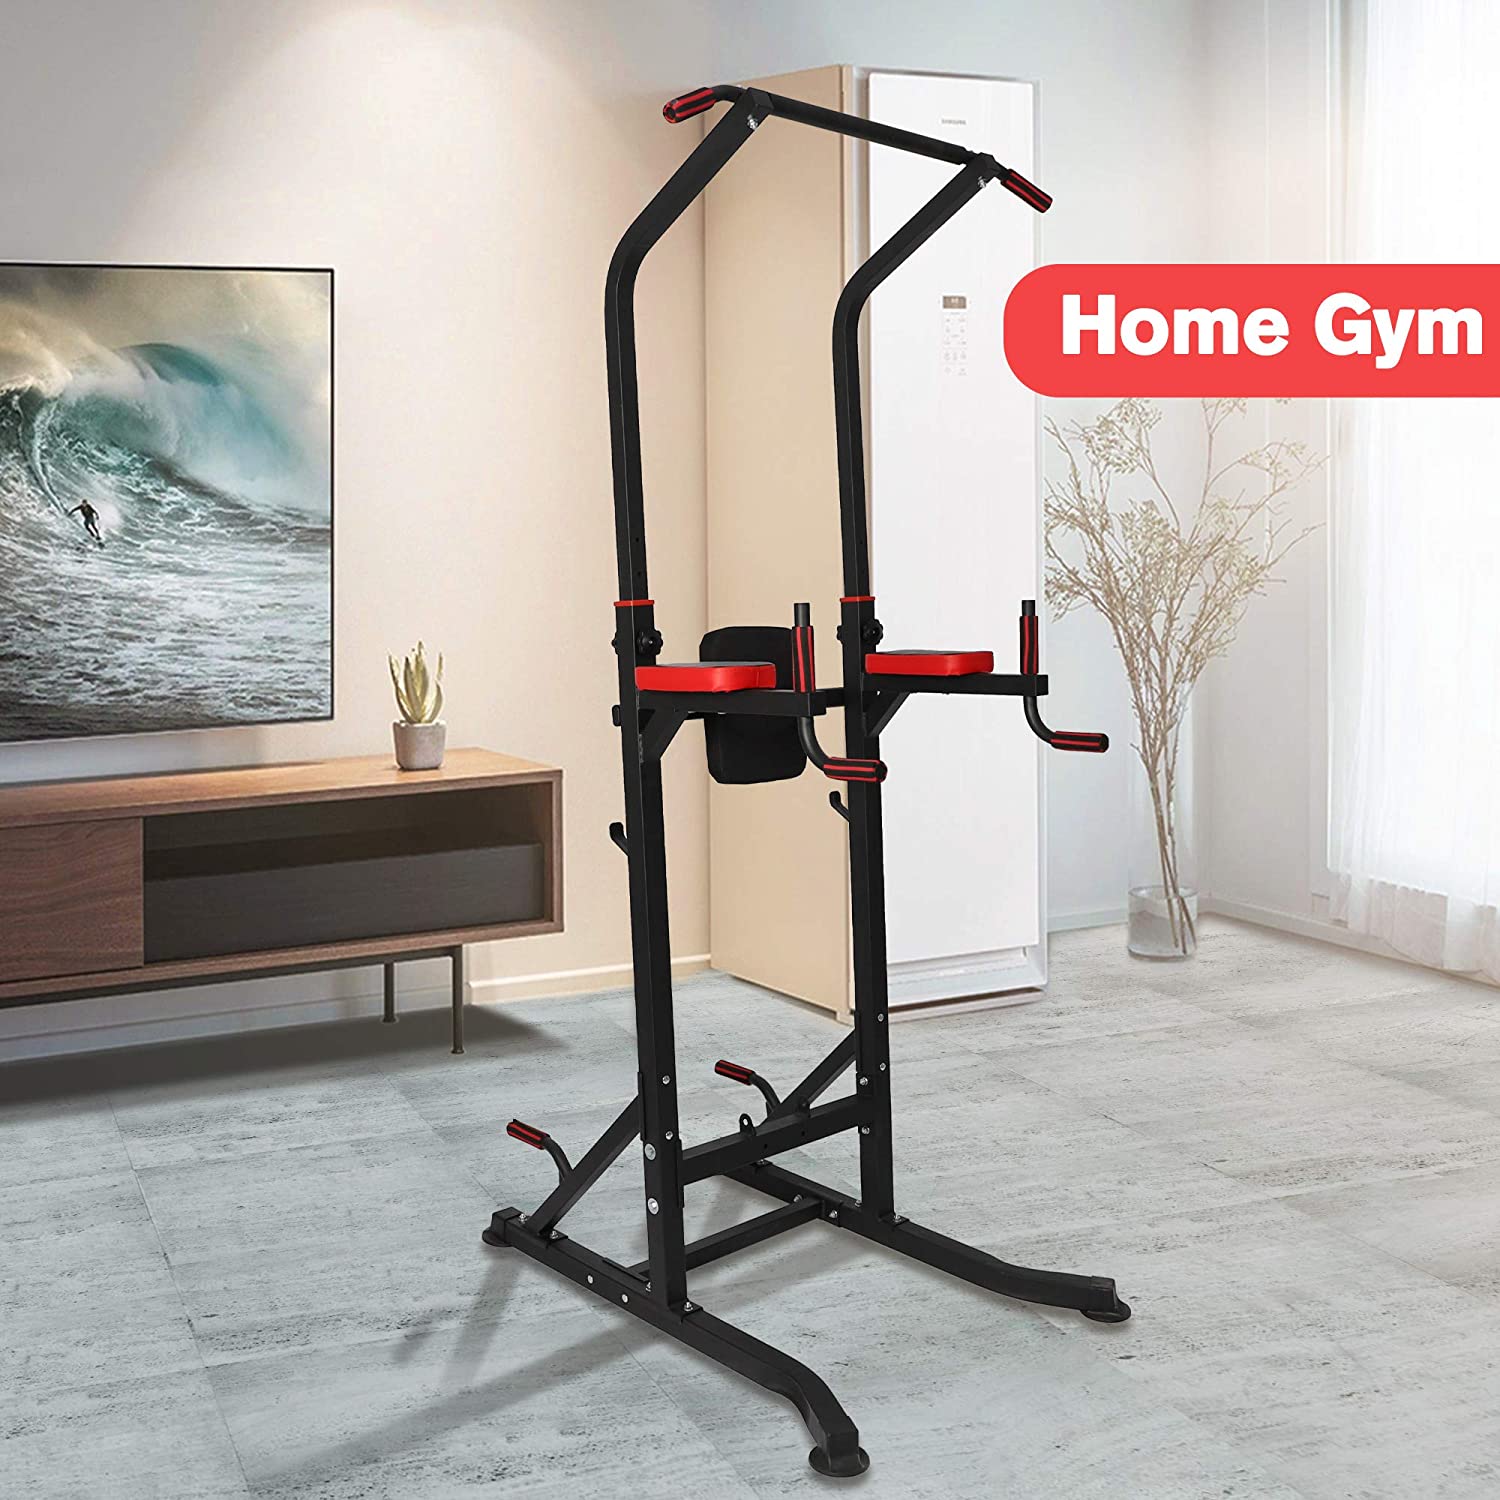 Power Tower Home Gym Pull Up Workout Dip Stand Bar Station Strength Training Fitness Exercise Equipment